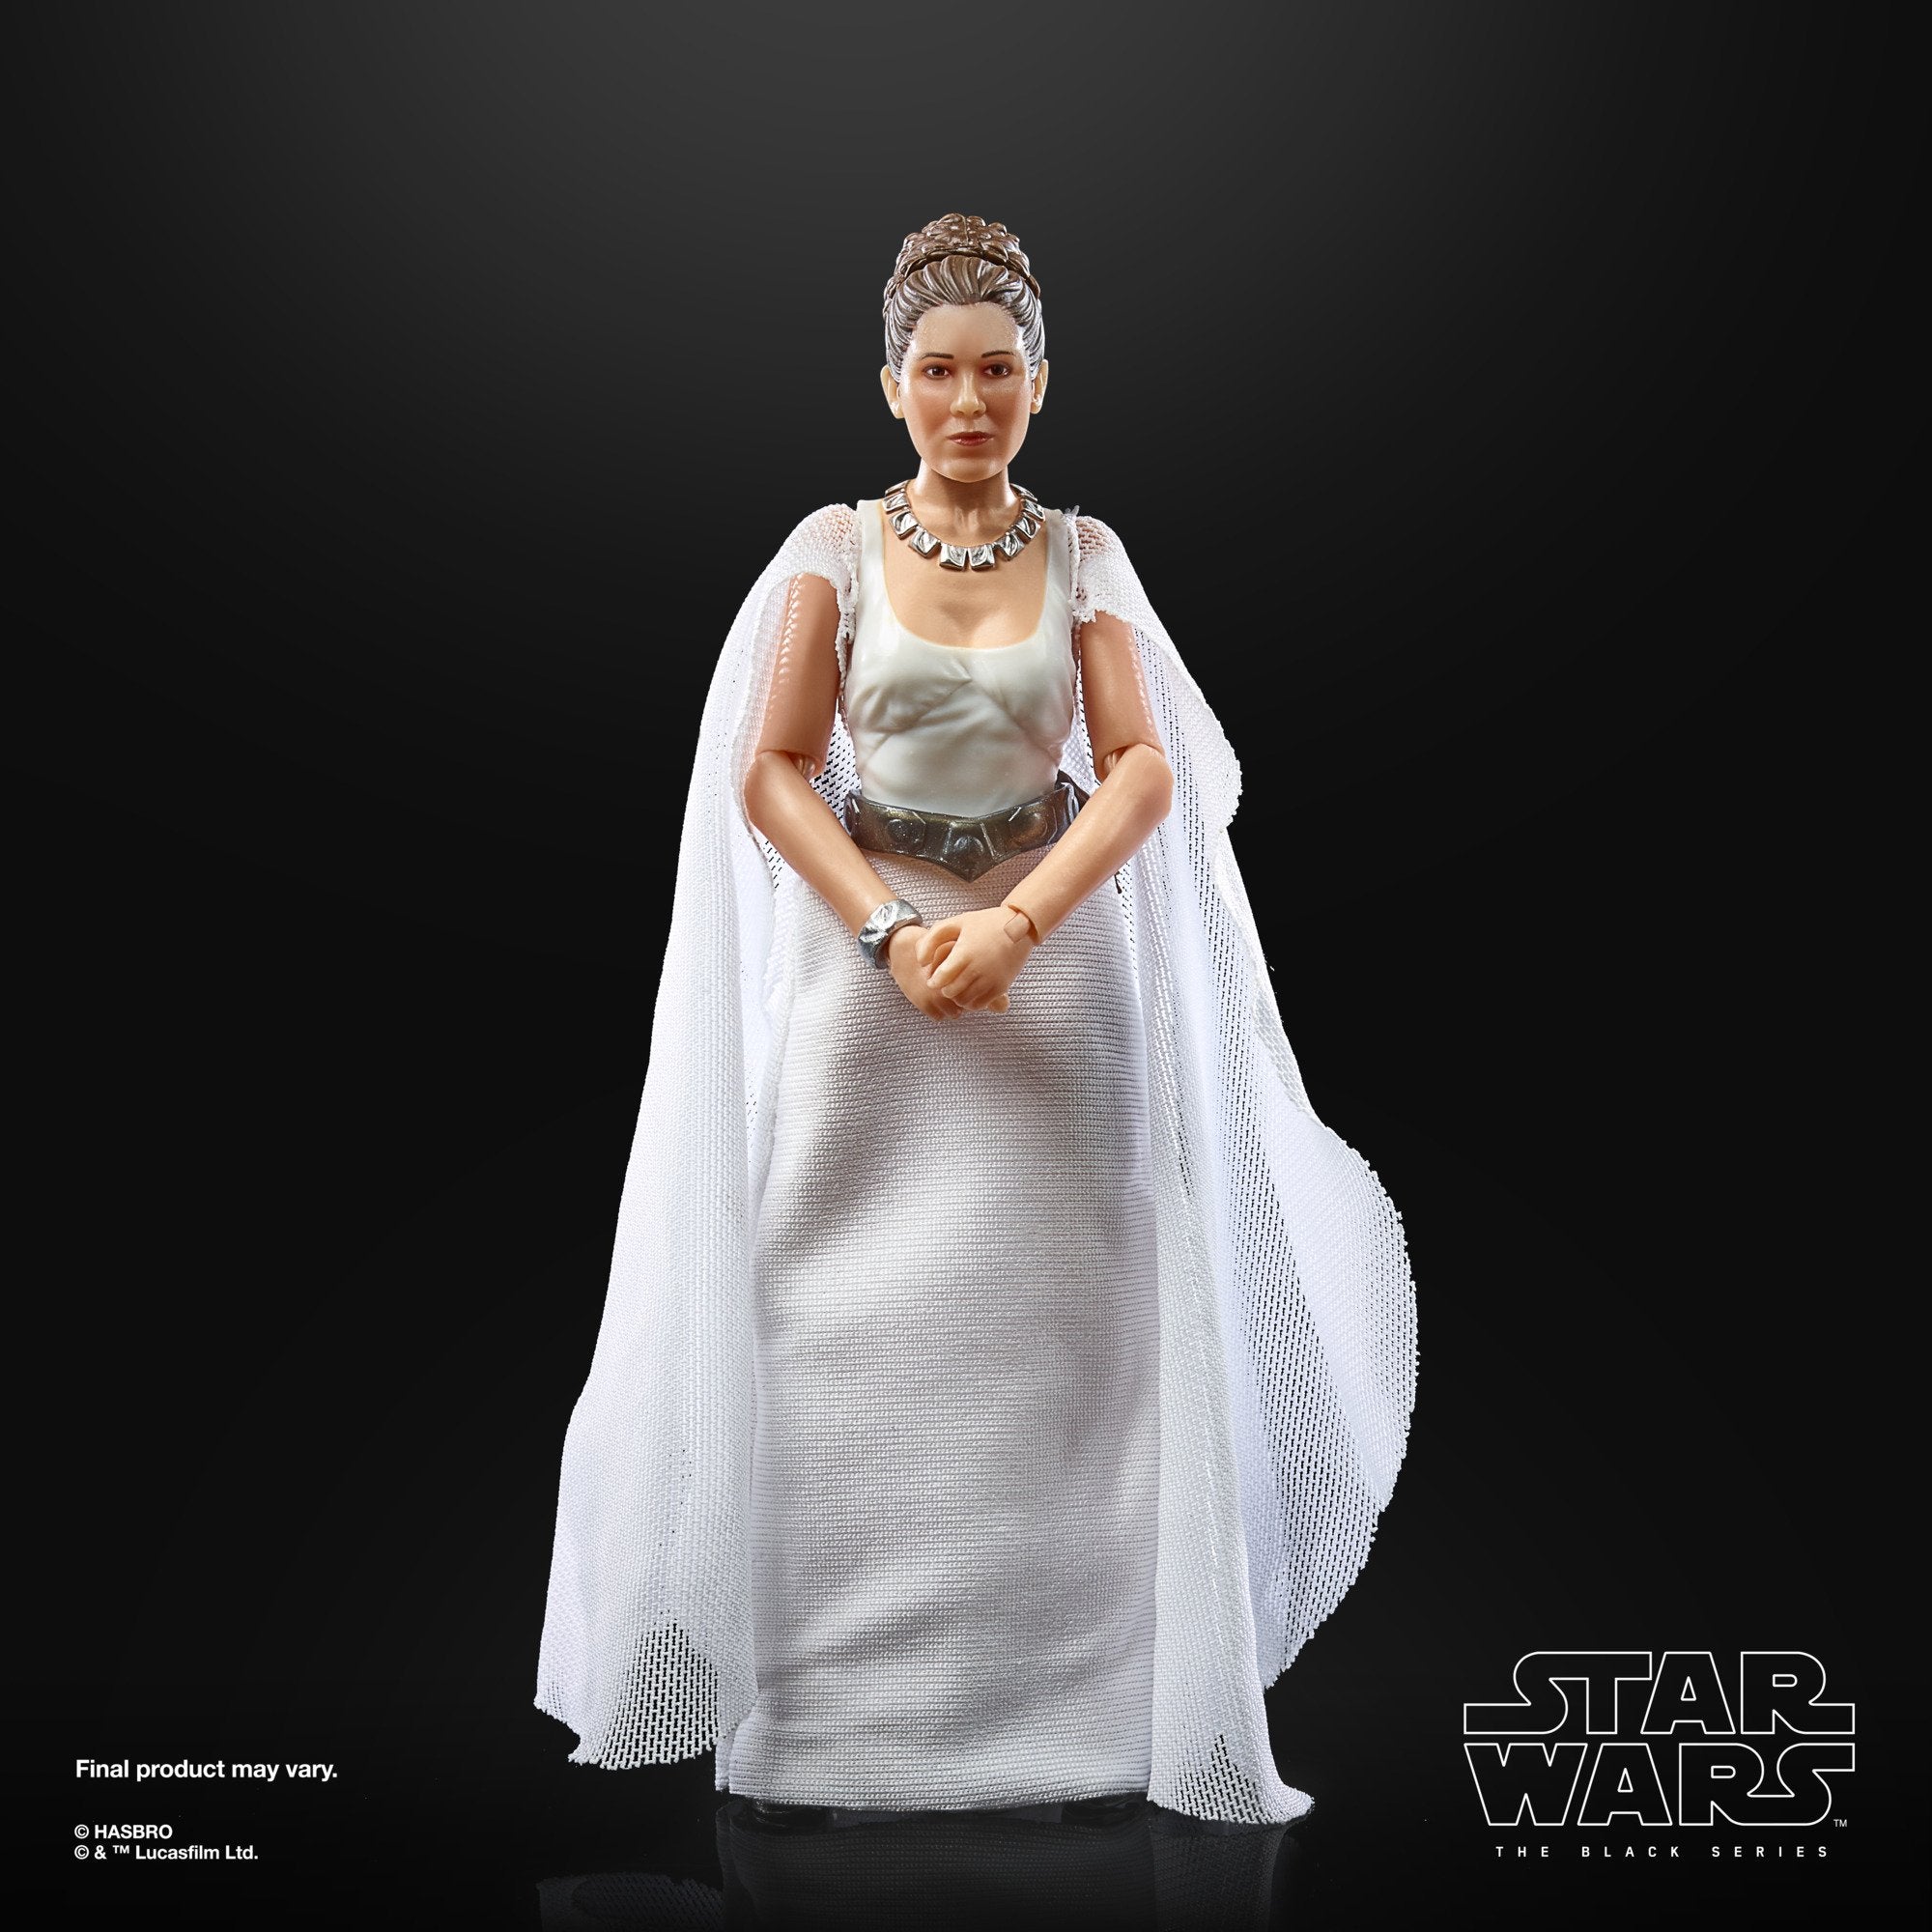 Hasbro Star Wars The Black Series Lucasfilm 50th Anniversary The Power of the Force Princess Leia Organa (Yavin 4) 6 Inch Action Figure